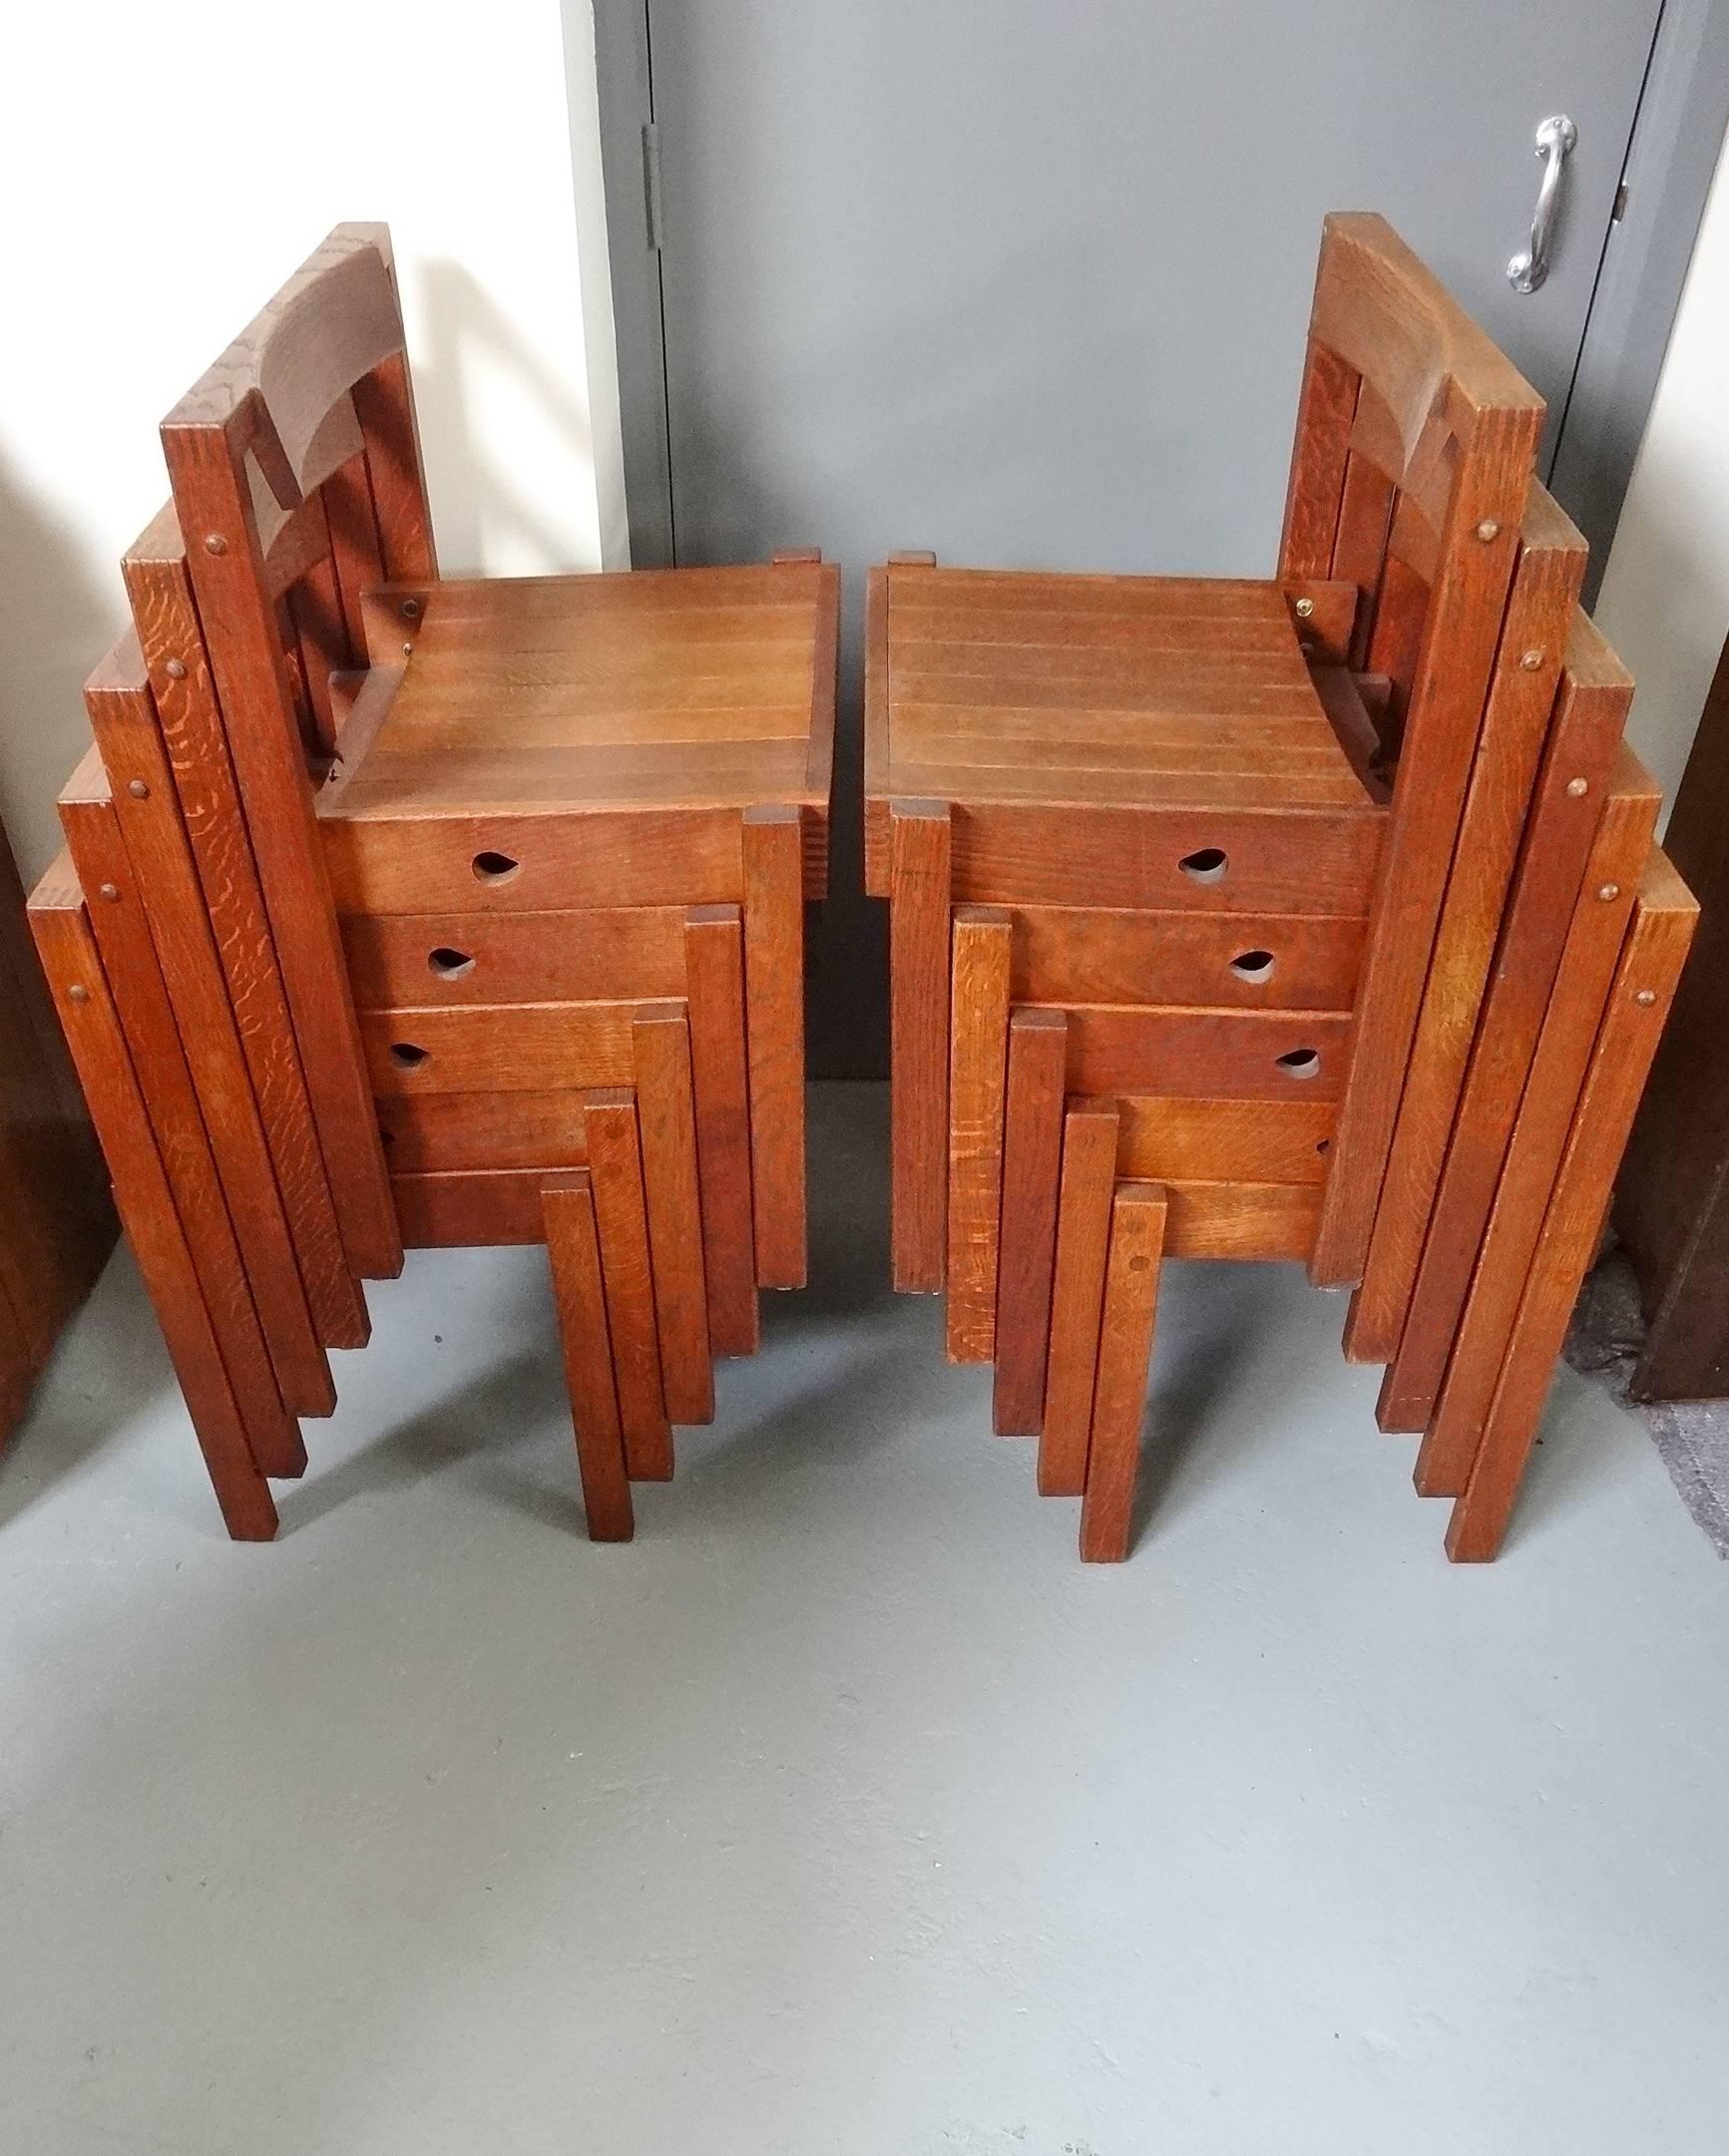 A rare and iconic set of ten, oak “Coventry Cathedral” chairs by Gordon Russell Ltd, circa 1960.
Model no X118. Designed by Prof Dick Russell (Gordon’s brother) in 1960.
A design Classic.

Coventry Cathedral in England was damaged by bombs